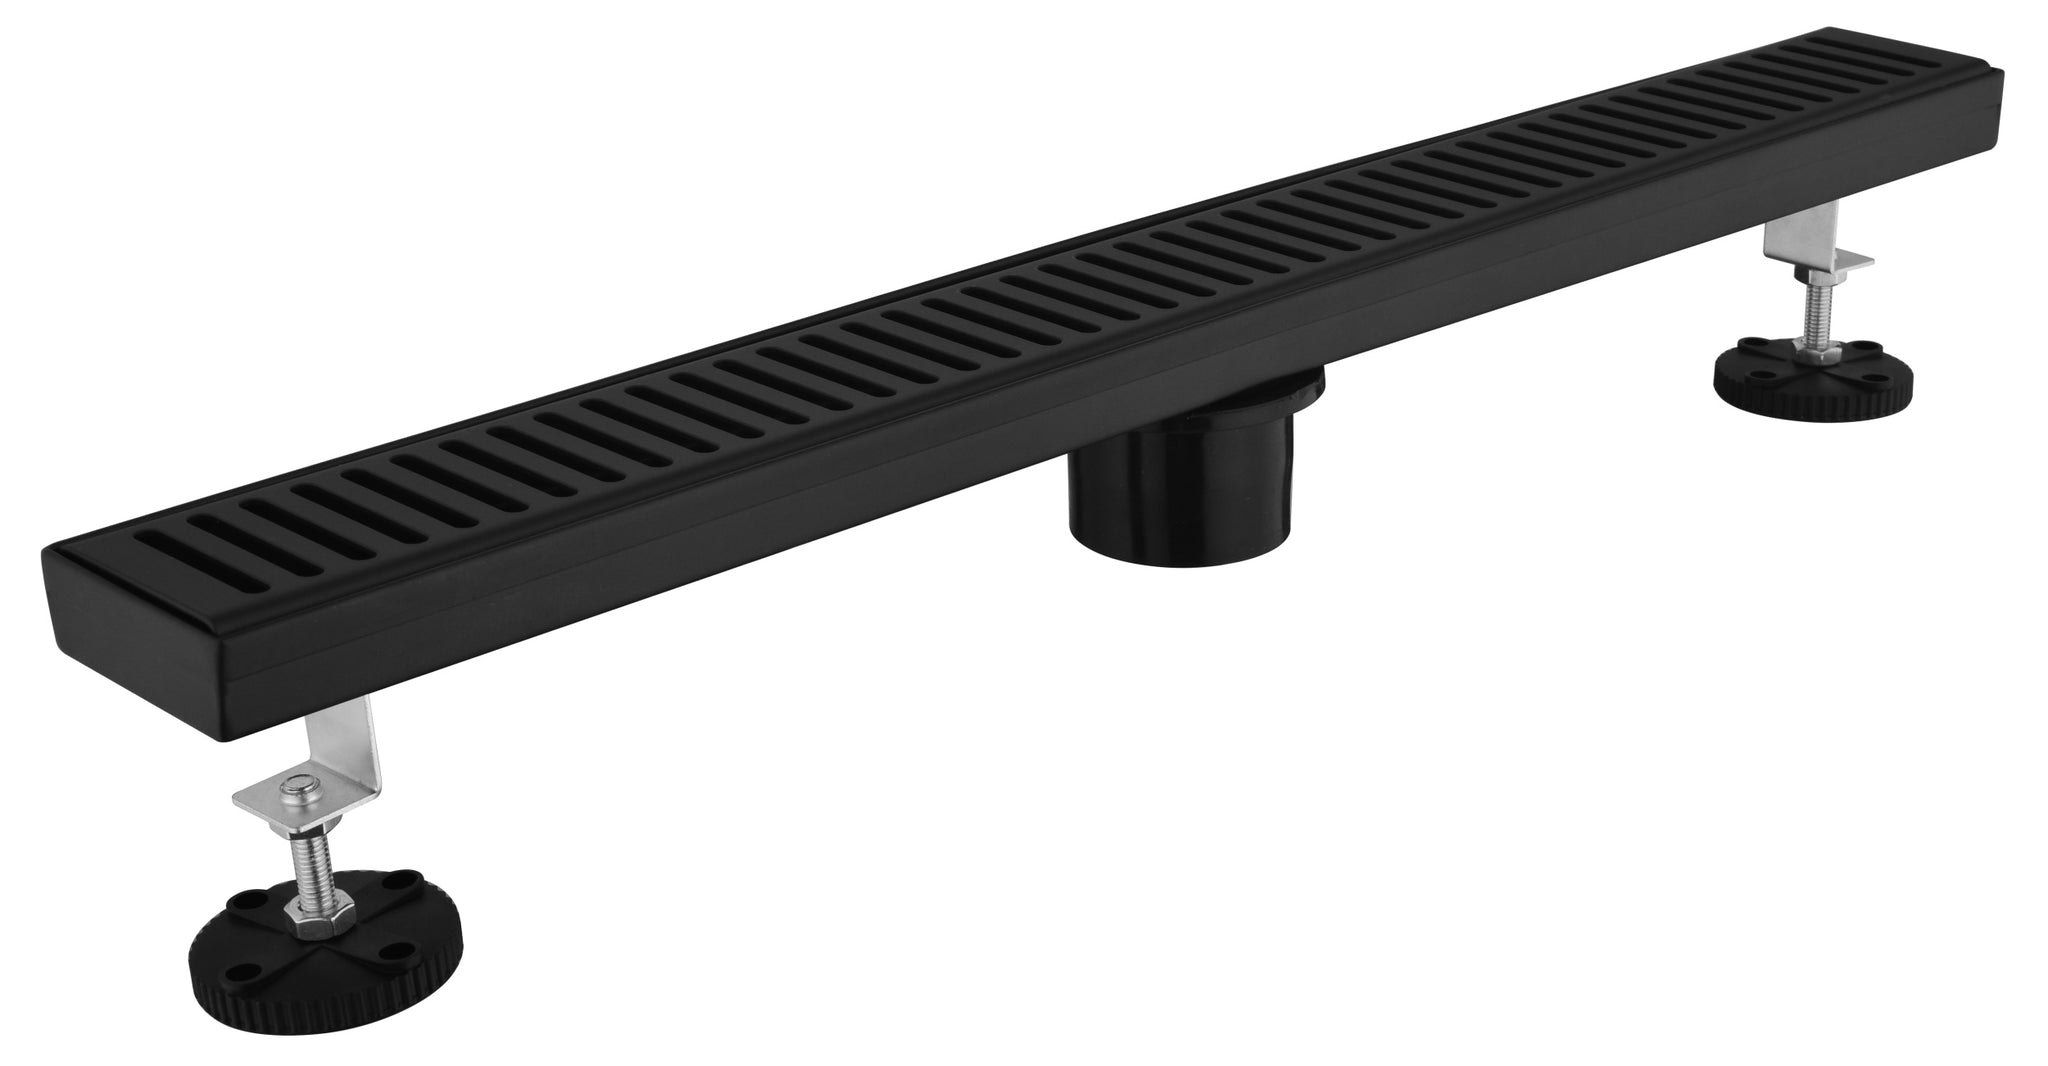 24 Inches Linear Shower Drain with Removable Quadrato matte black-stainless steel